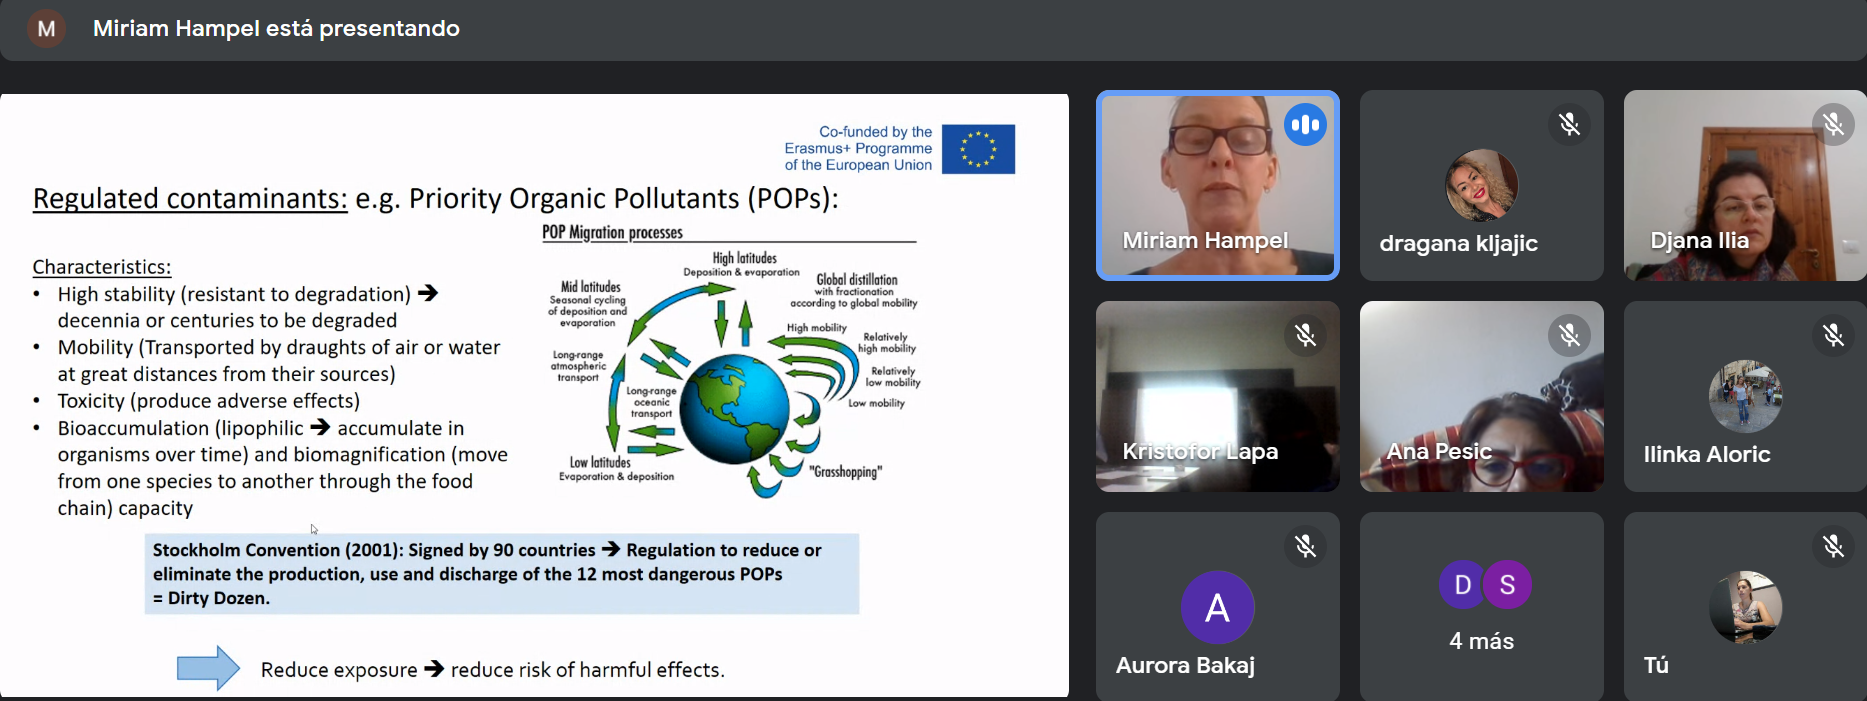 1ª formación del proyecto MEP&M: Know-how transfer related to the latest topics in climate change and marine pollution effects on marine ecosystems